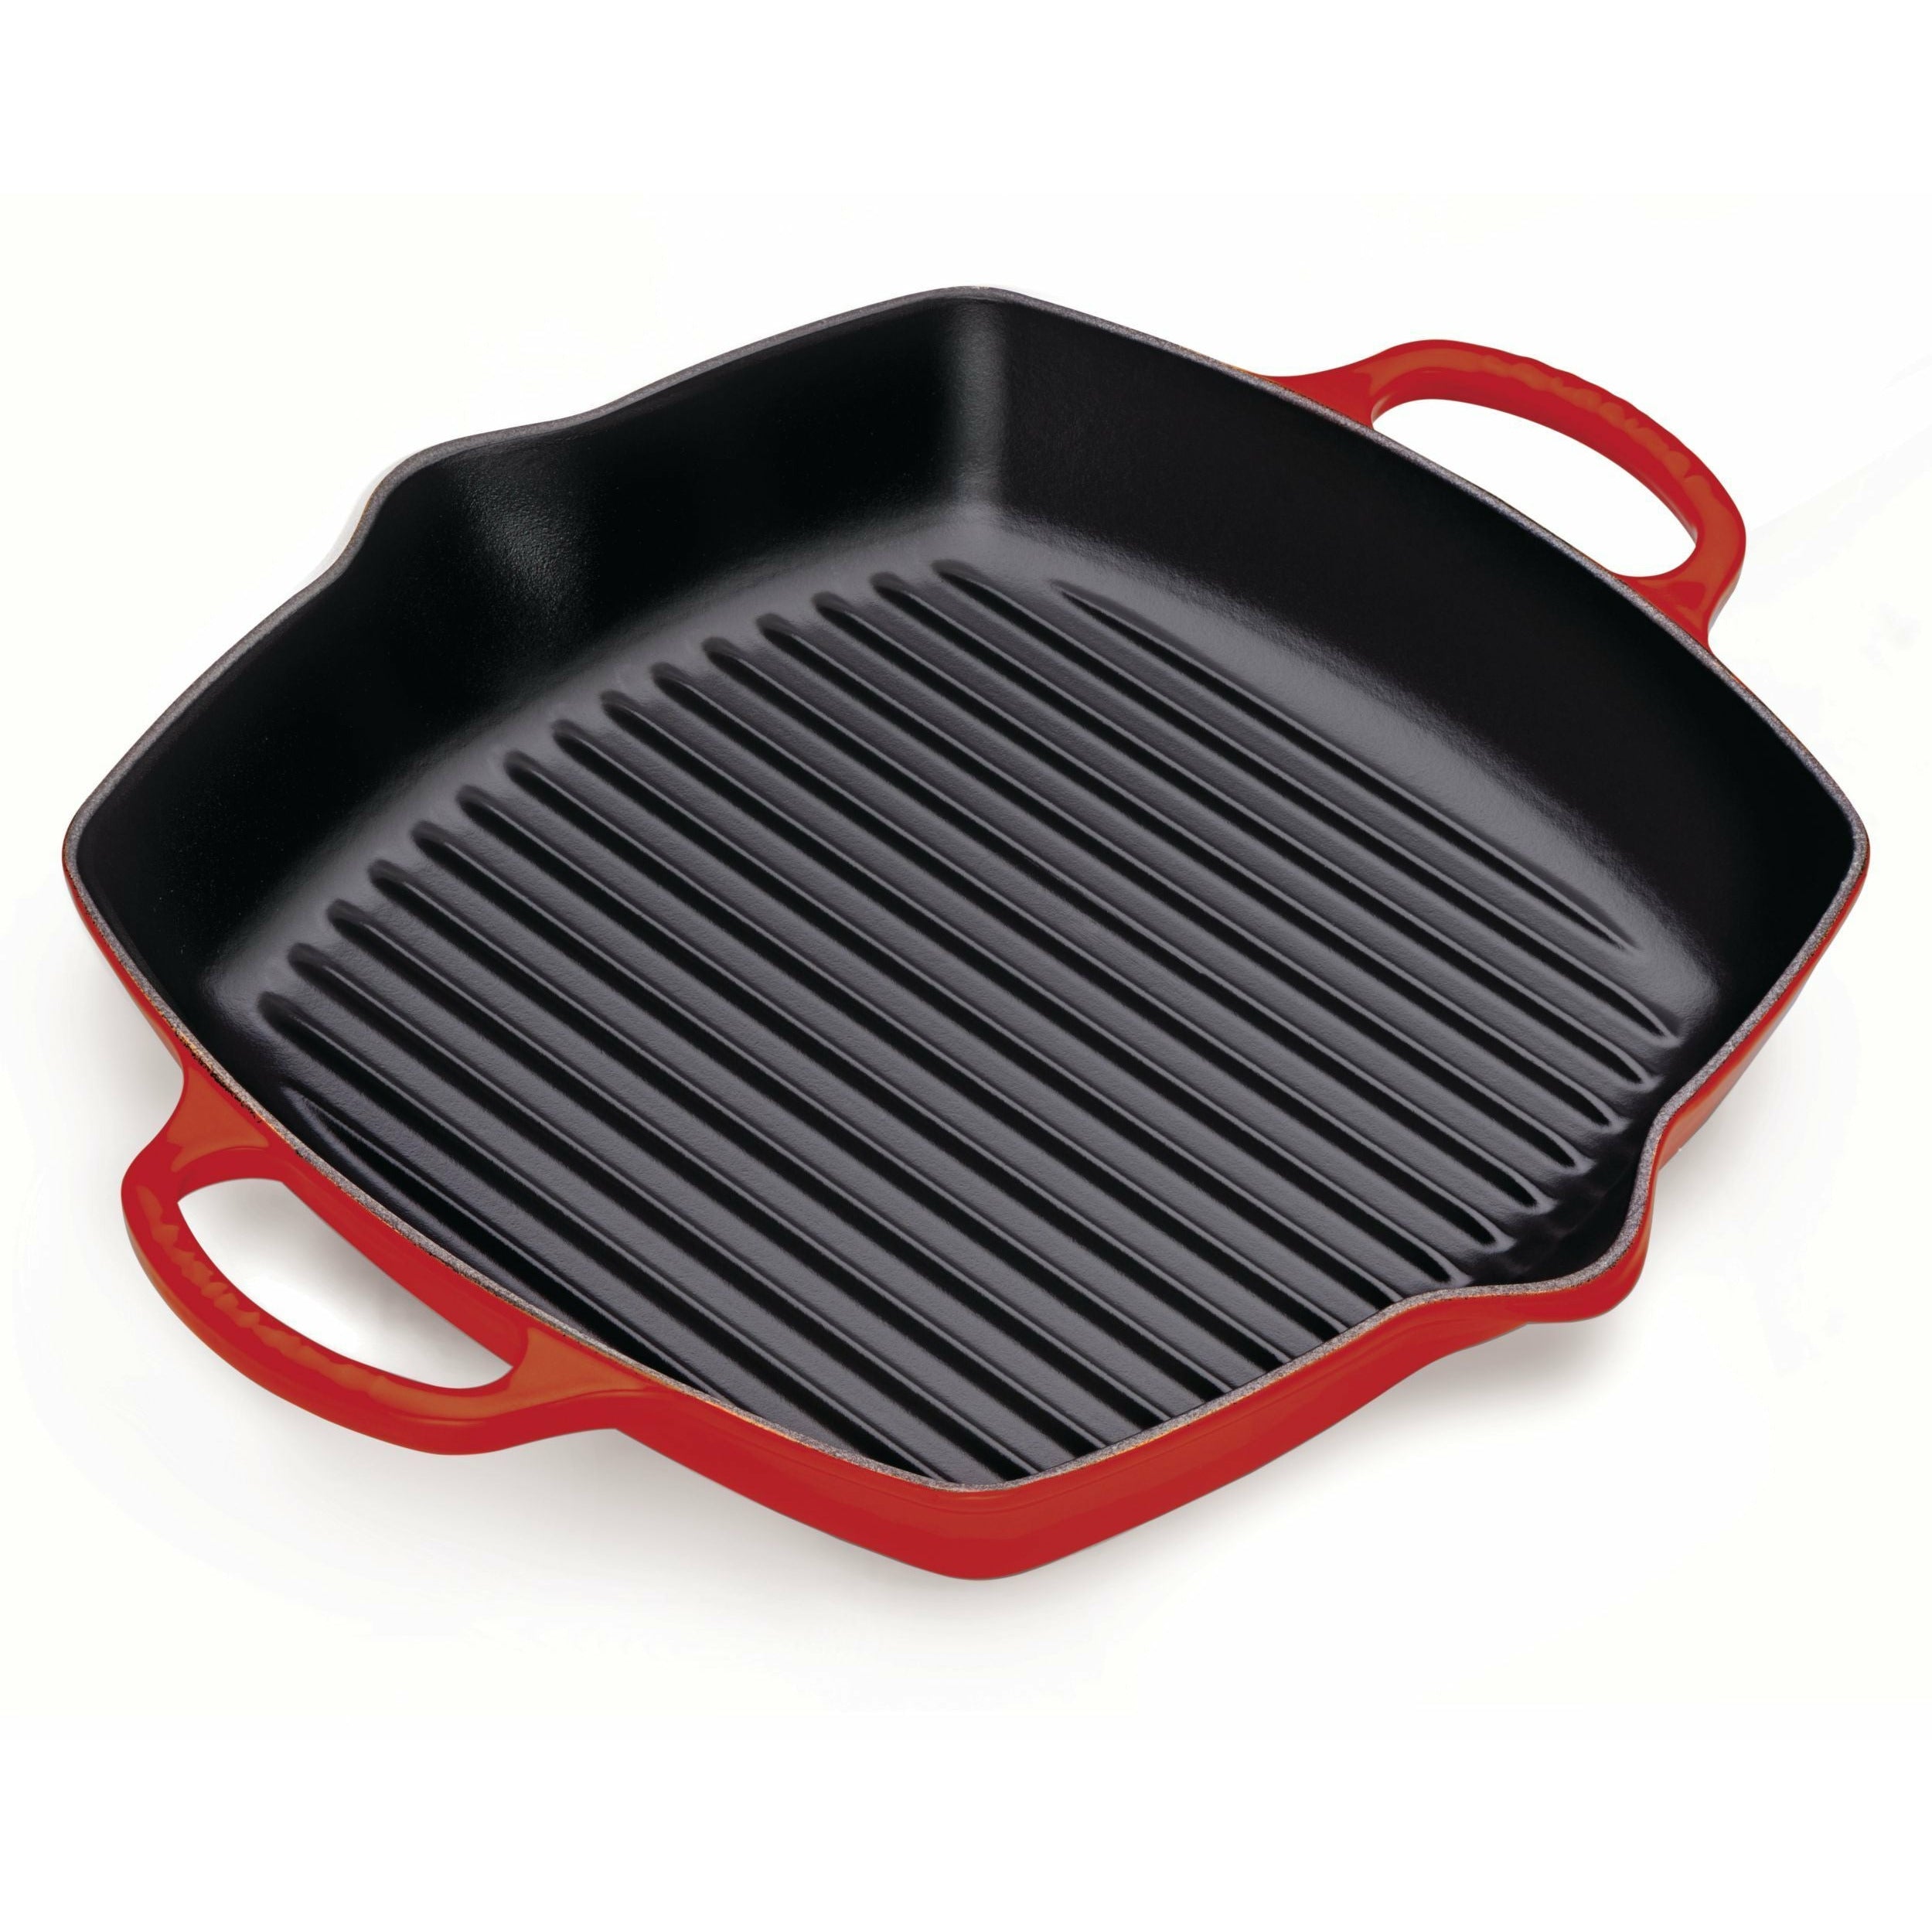 Le Creuset Nature High Square Grill Pan 30厘米，樱桃红色